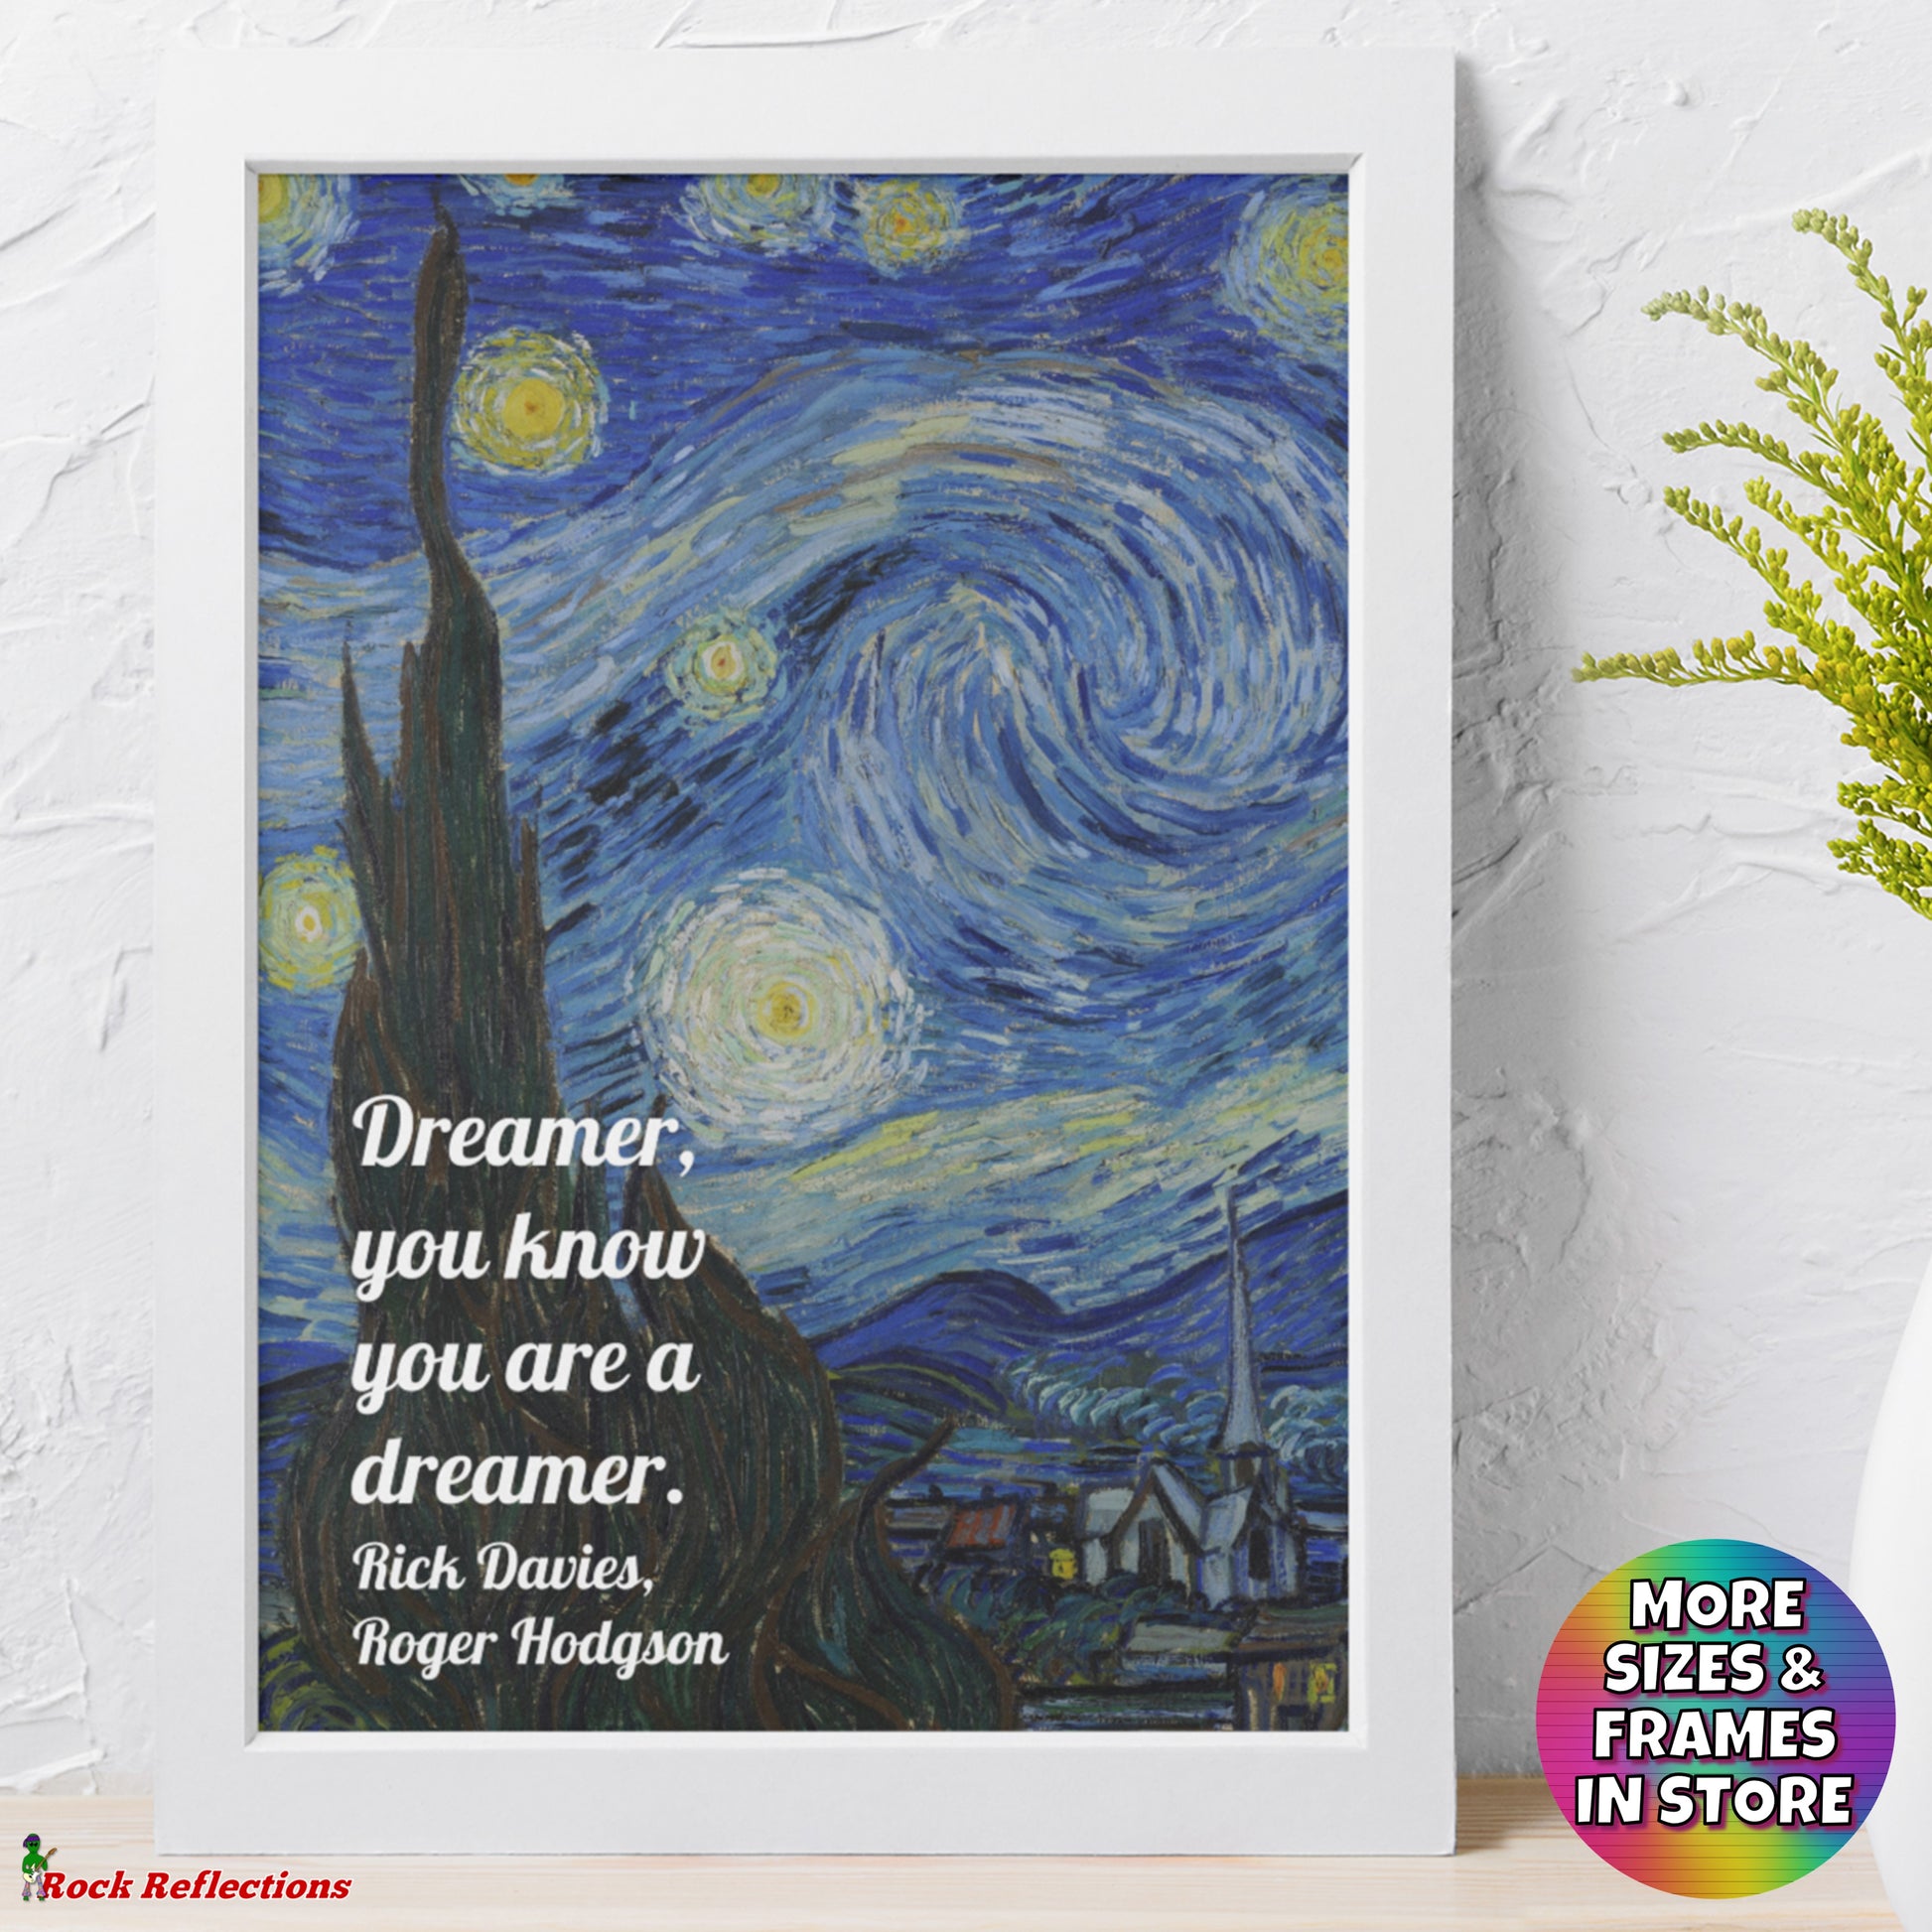 You Know You Are a Dreamer - Music Quote Framed Print Gelato